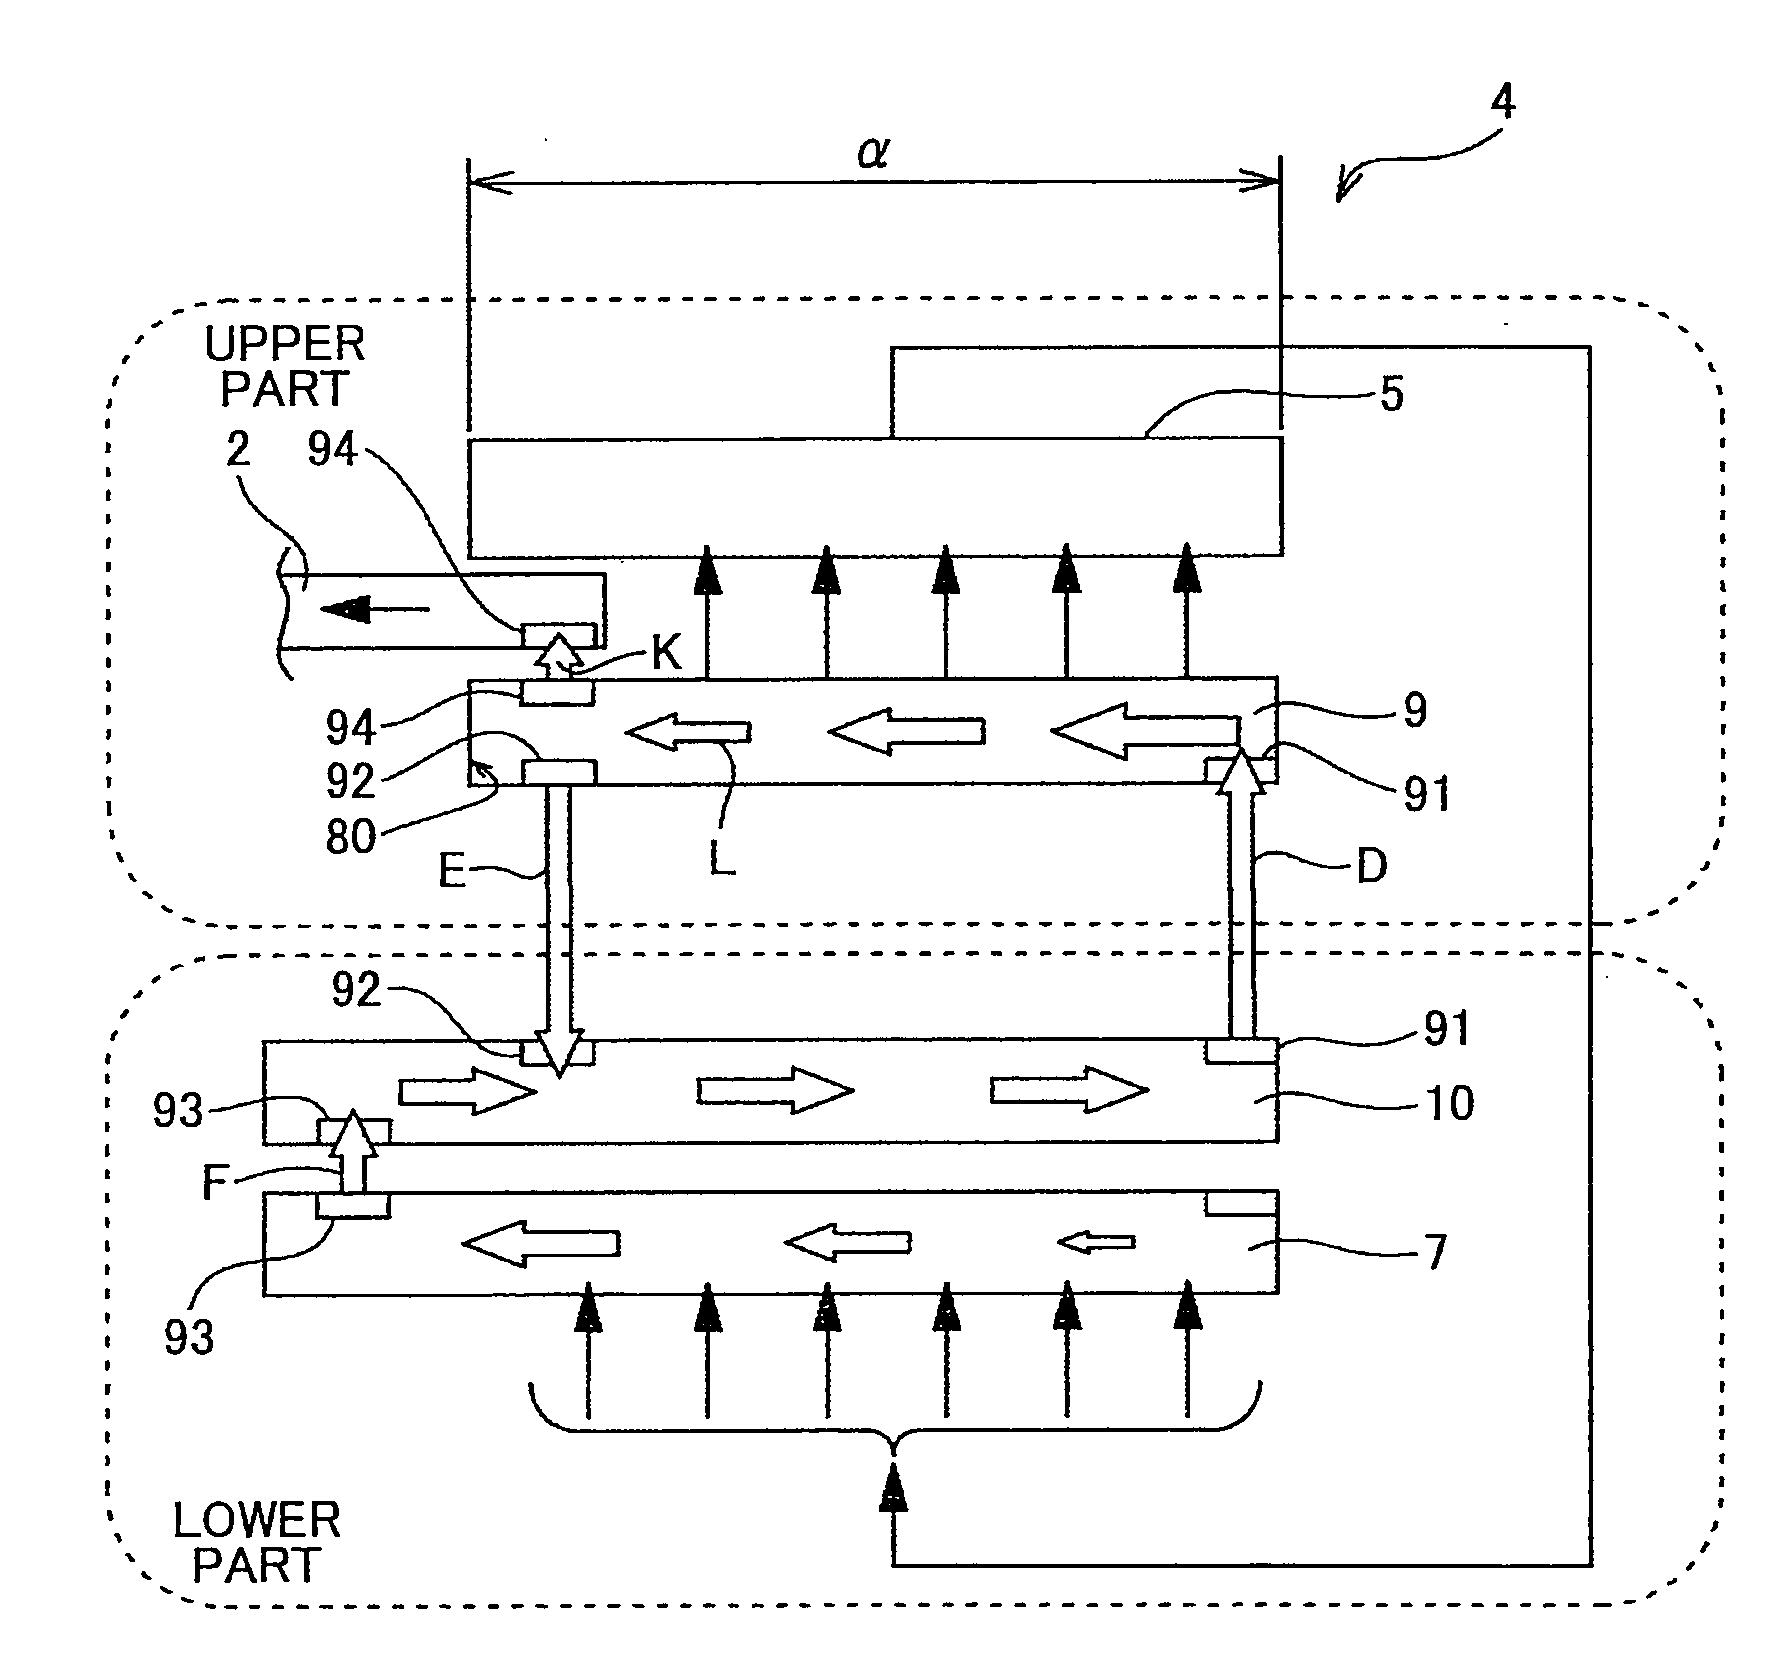 Image forming apparatus and developing device used therein